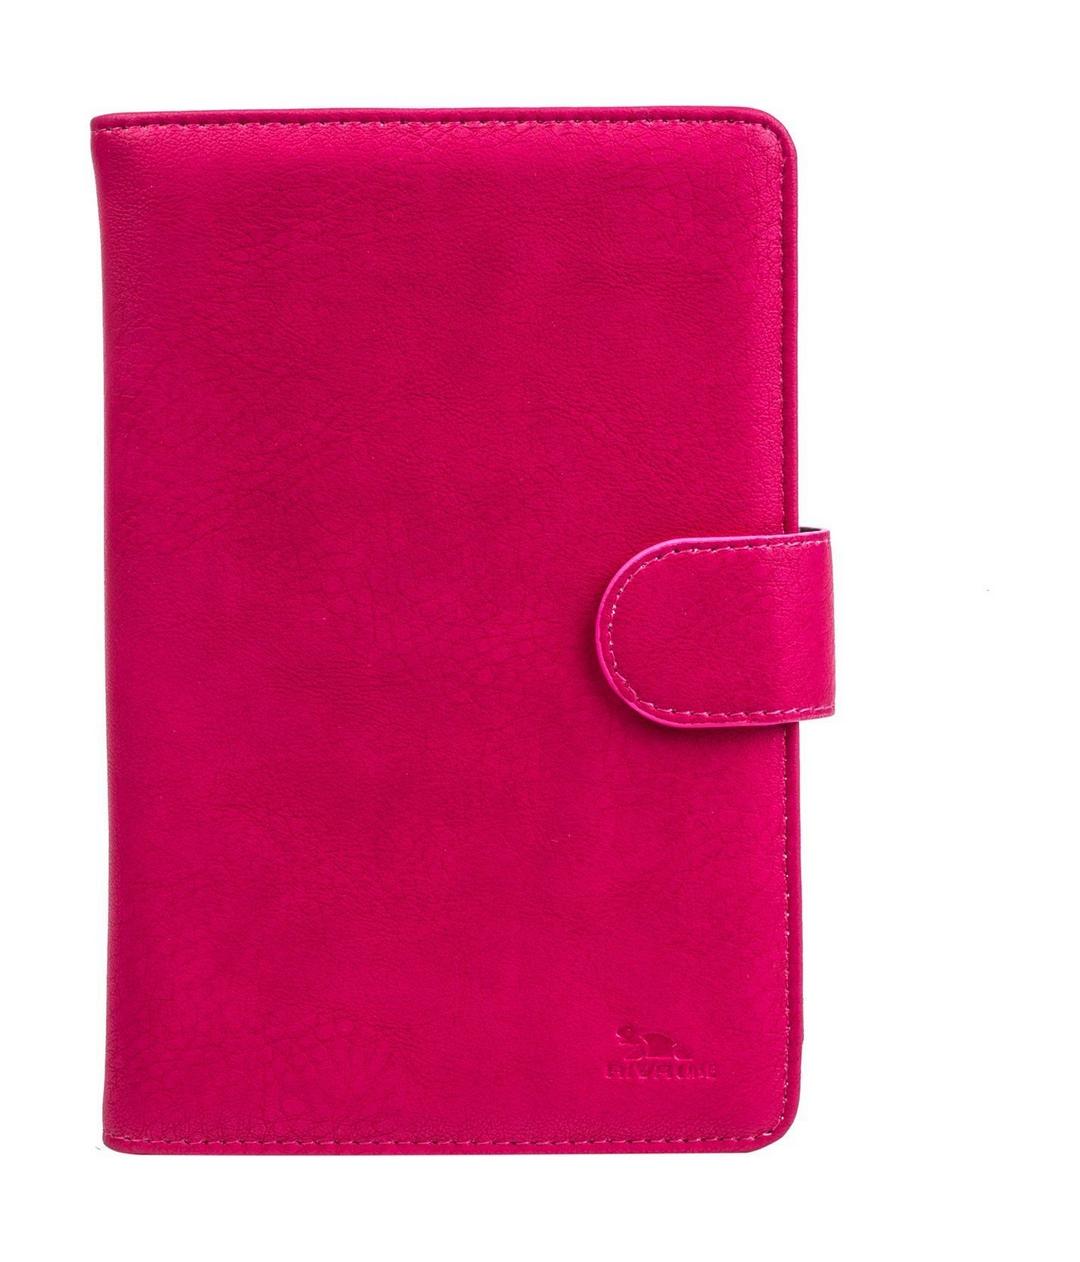 RivaCase Protective Case for 10 inch Tablet (3017) - Pink